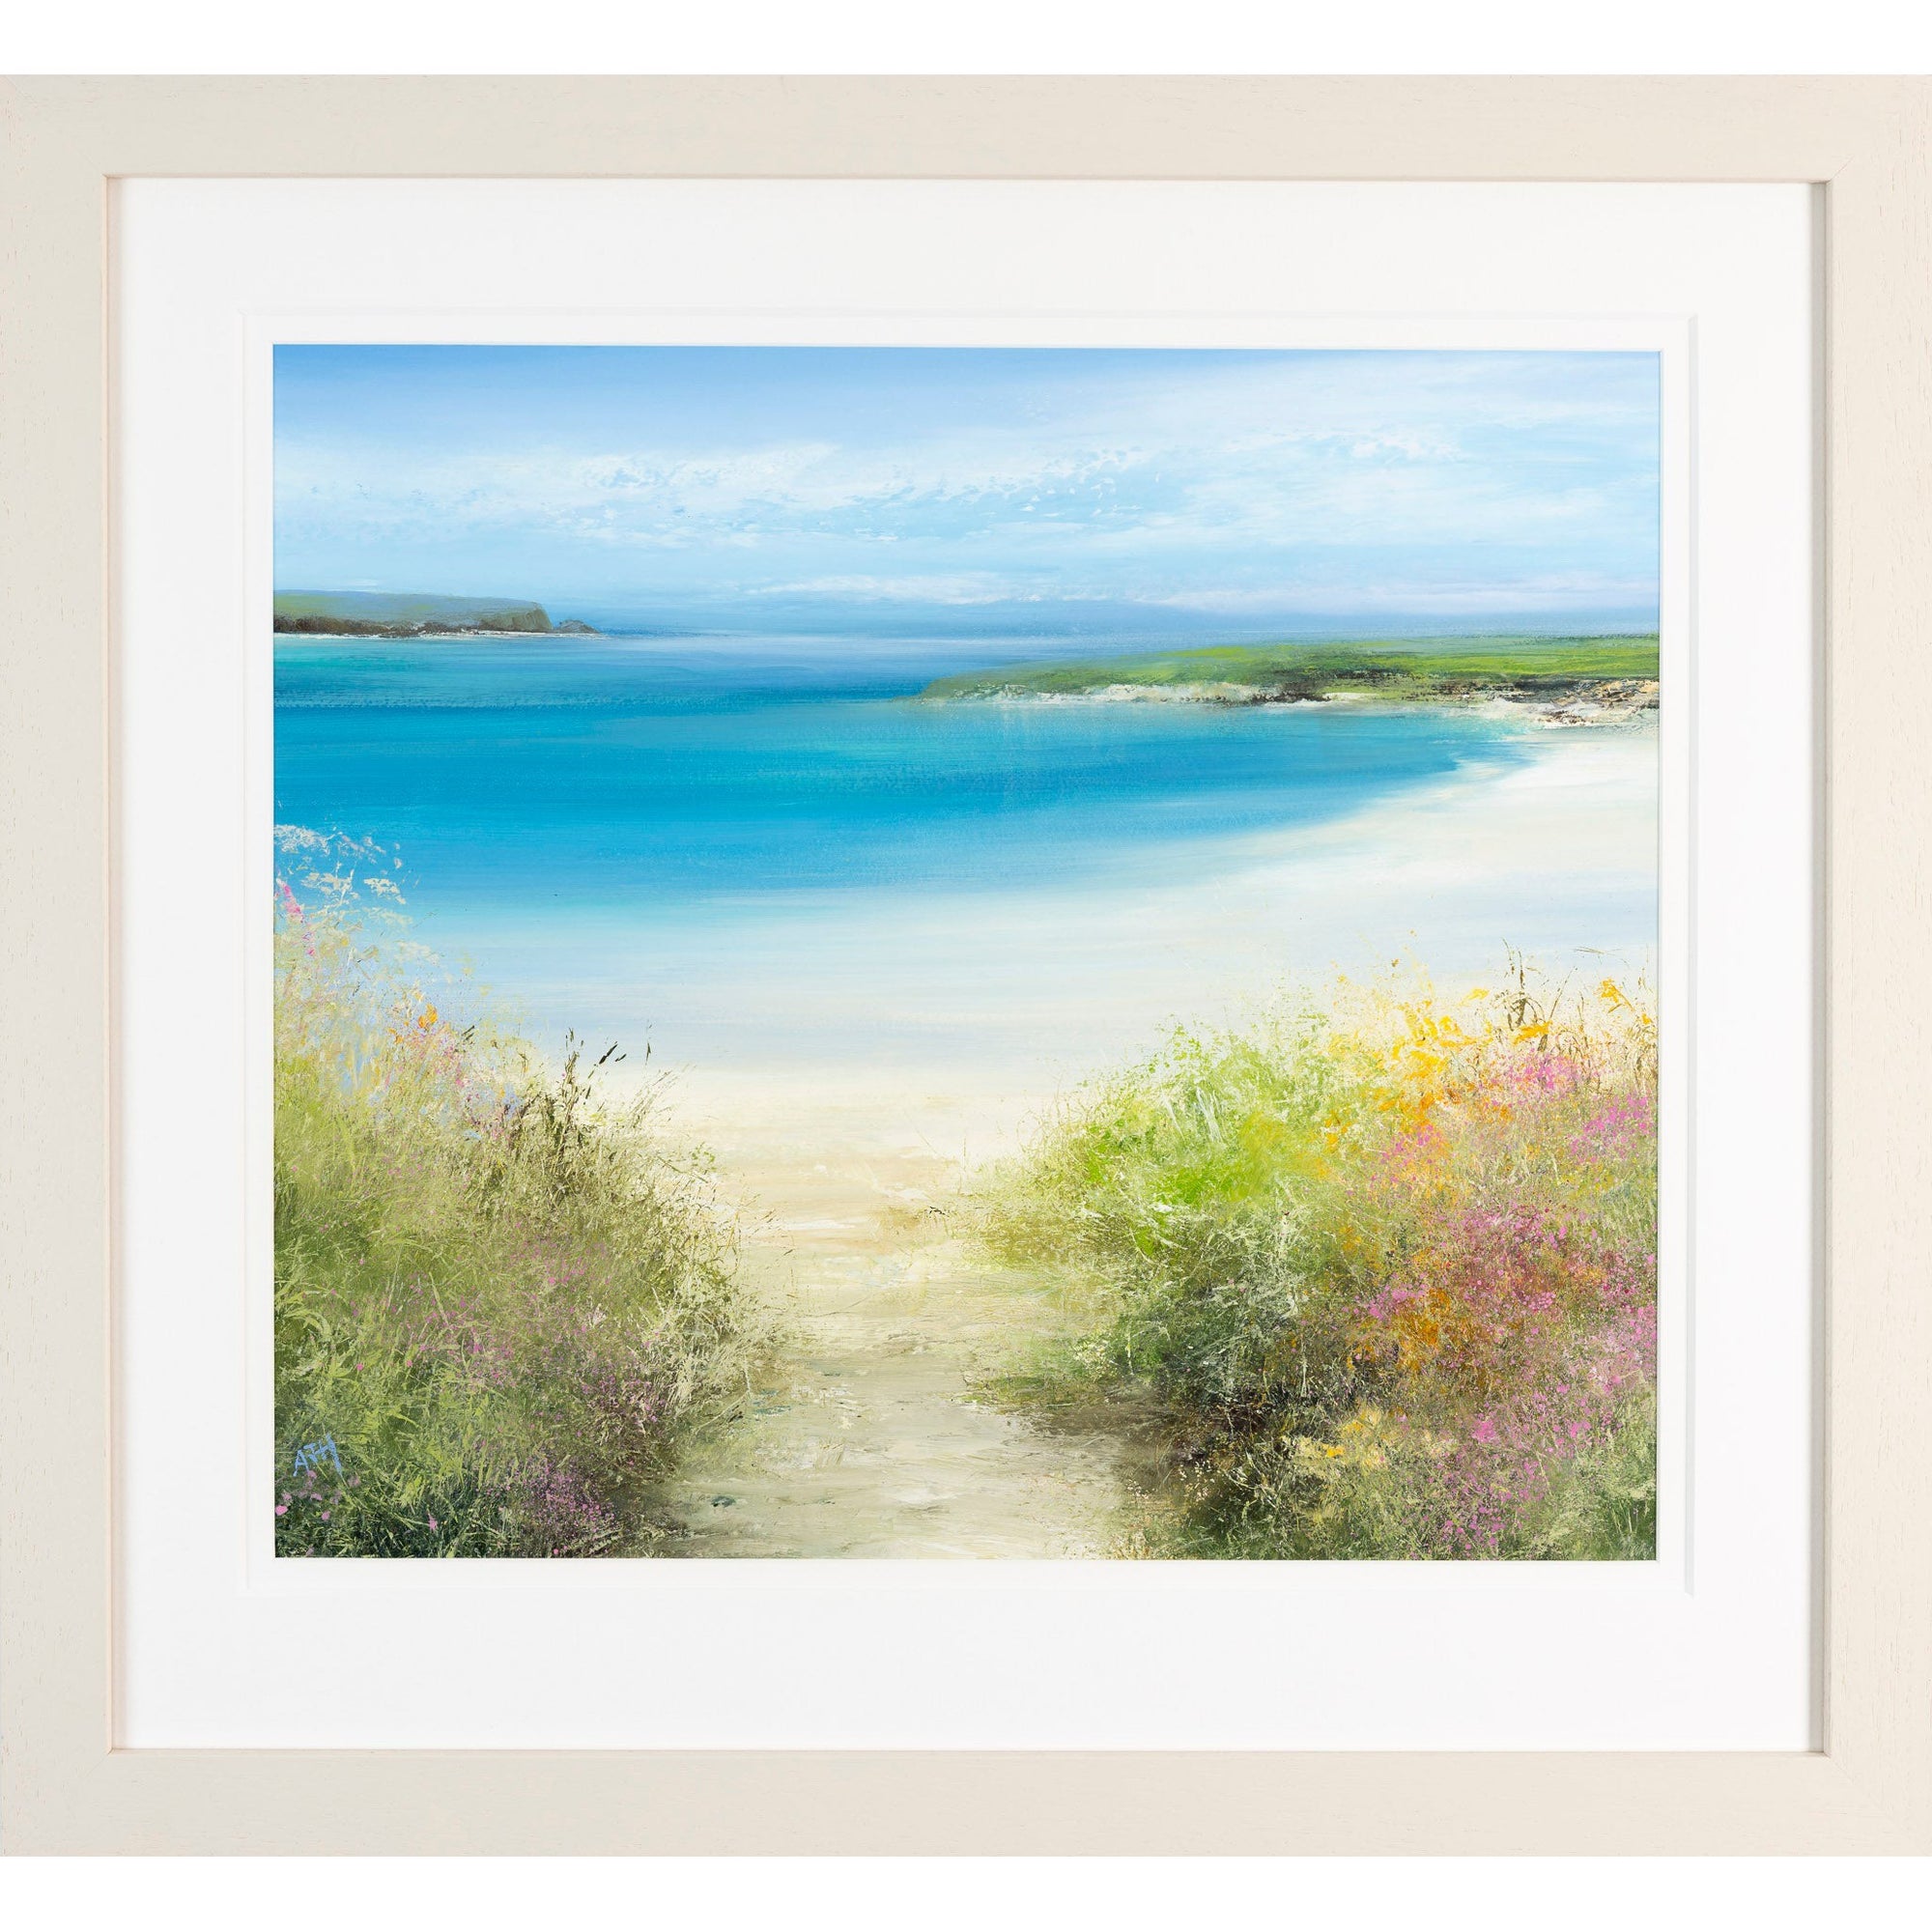 'A Turquoise Tide At Daymer Bay' oil on paper original by Amanda Hoskin, available at Padstow Gallery, Cornwall